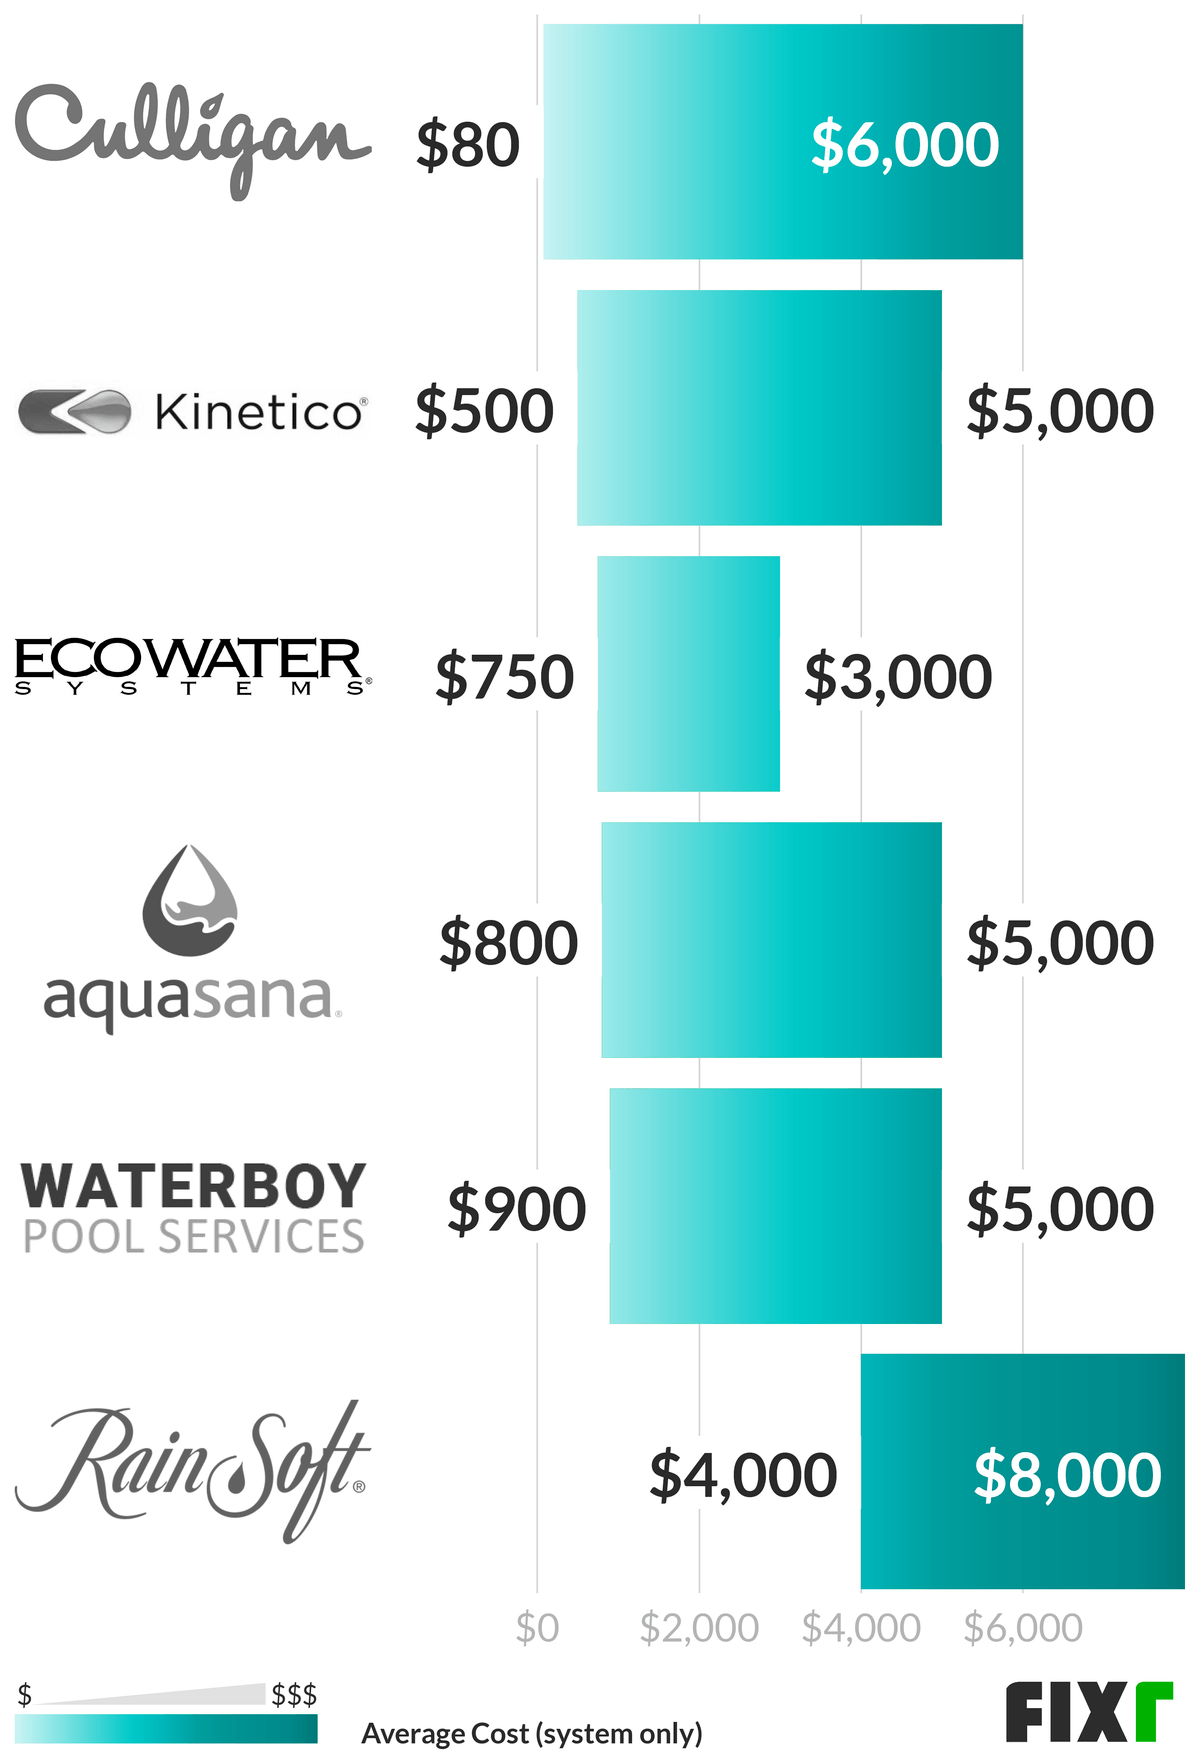 ecowater systems cost